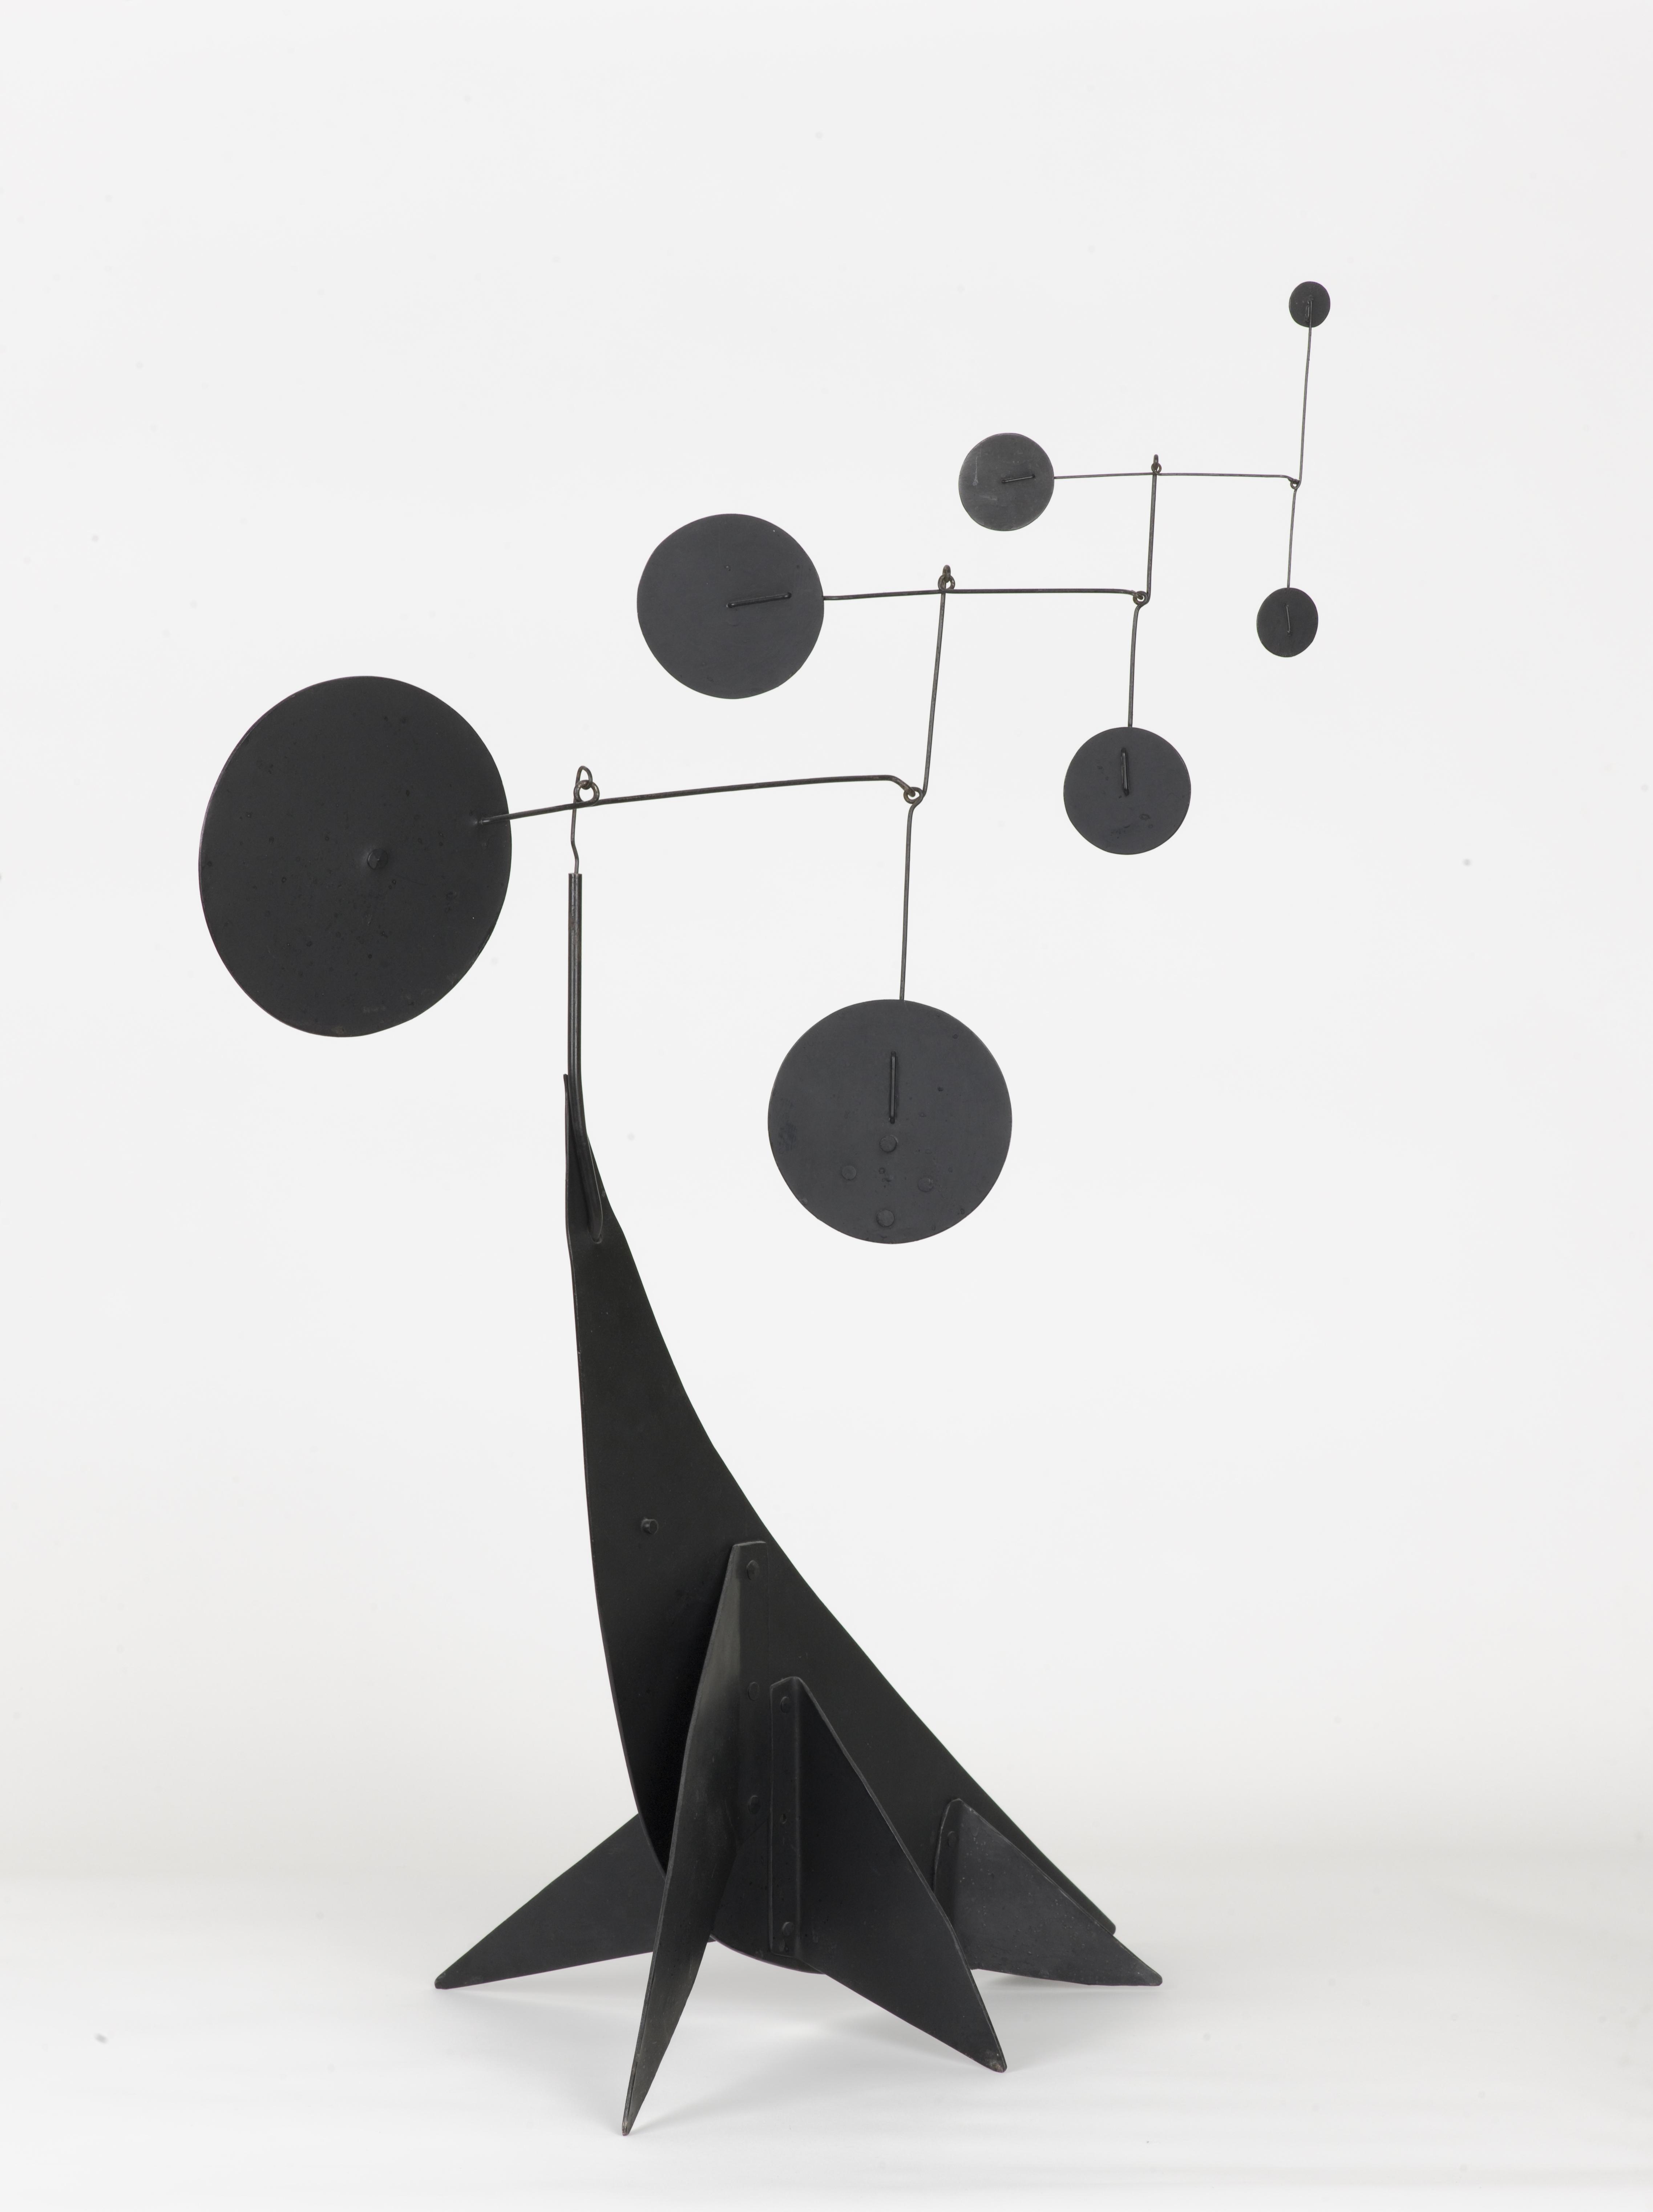 abstract sculpture of seal delicately balancing elements